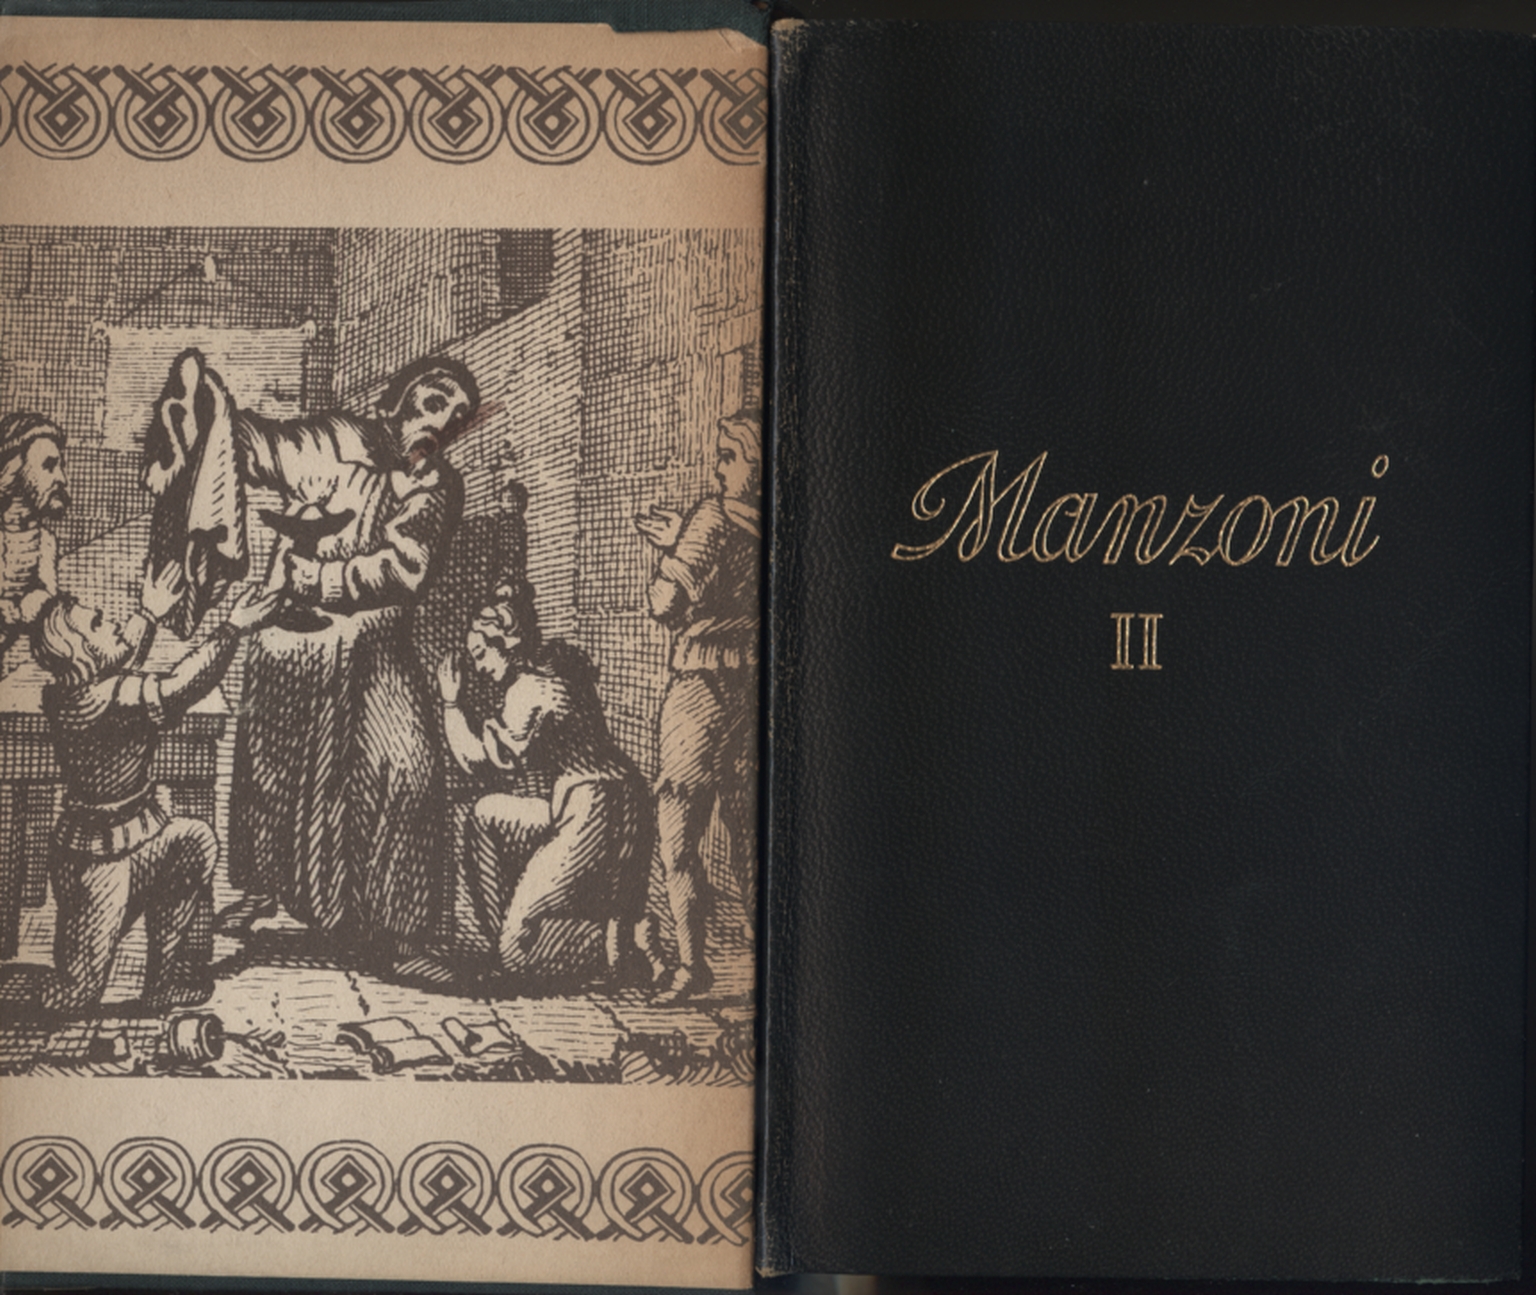 All the works of Alessandro Manzoni, Volume second, Alessandro Manzoni